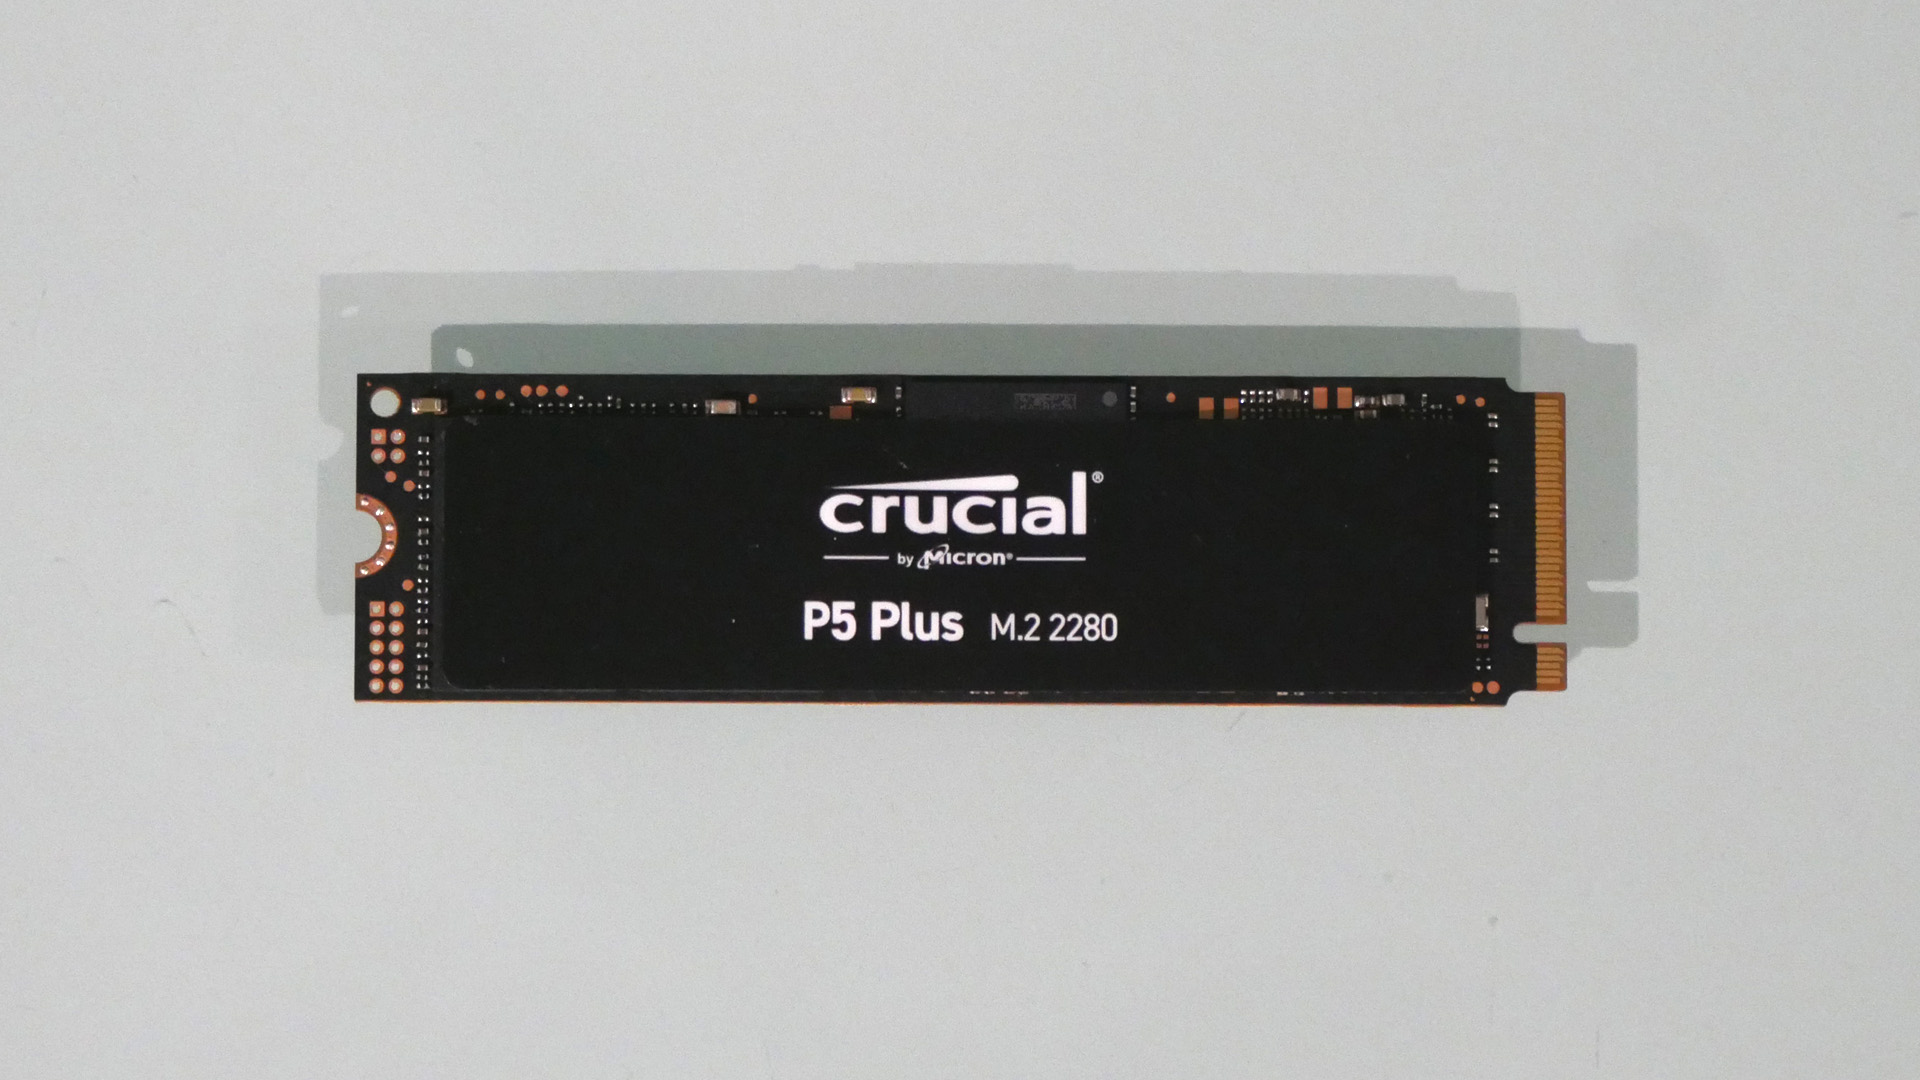 Crucial P5 Plus M.2 NVMe SSD Review: Affordable Gen4 Performance